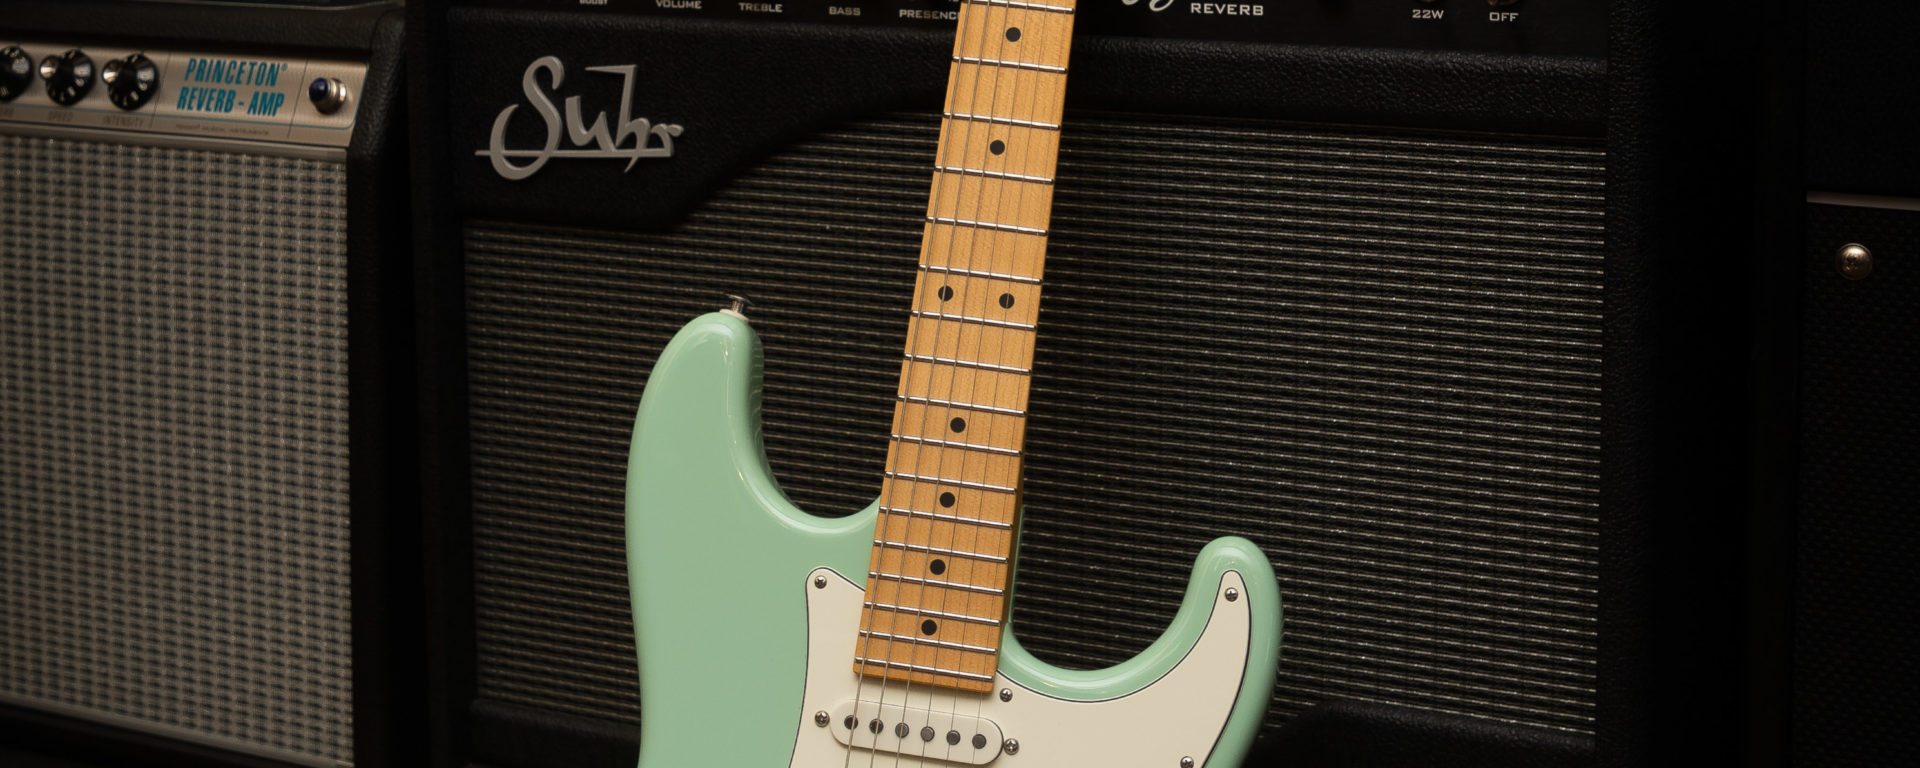 Suhr Guitars - Classic S - Surf Green - Maple Fingerboard - SSCII Equipped